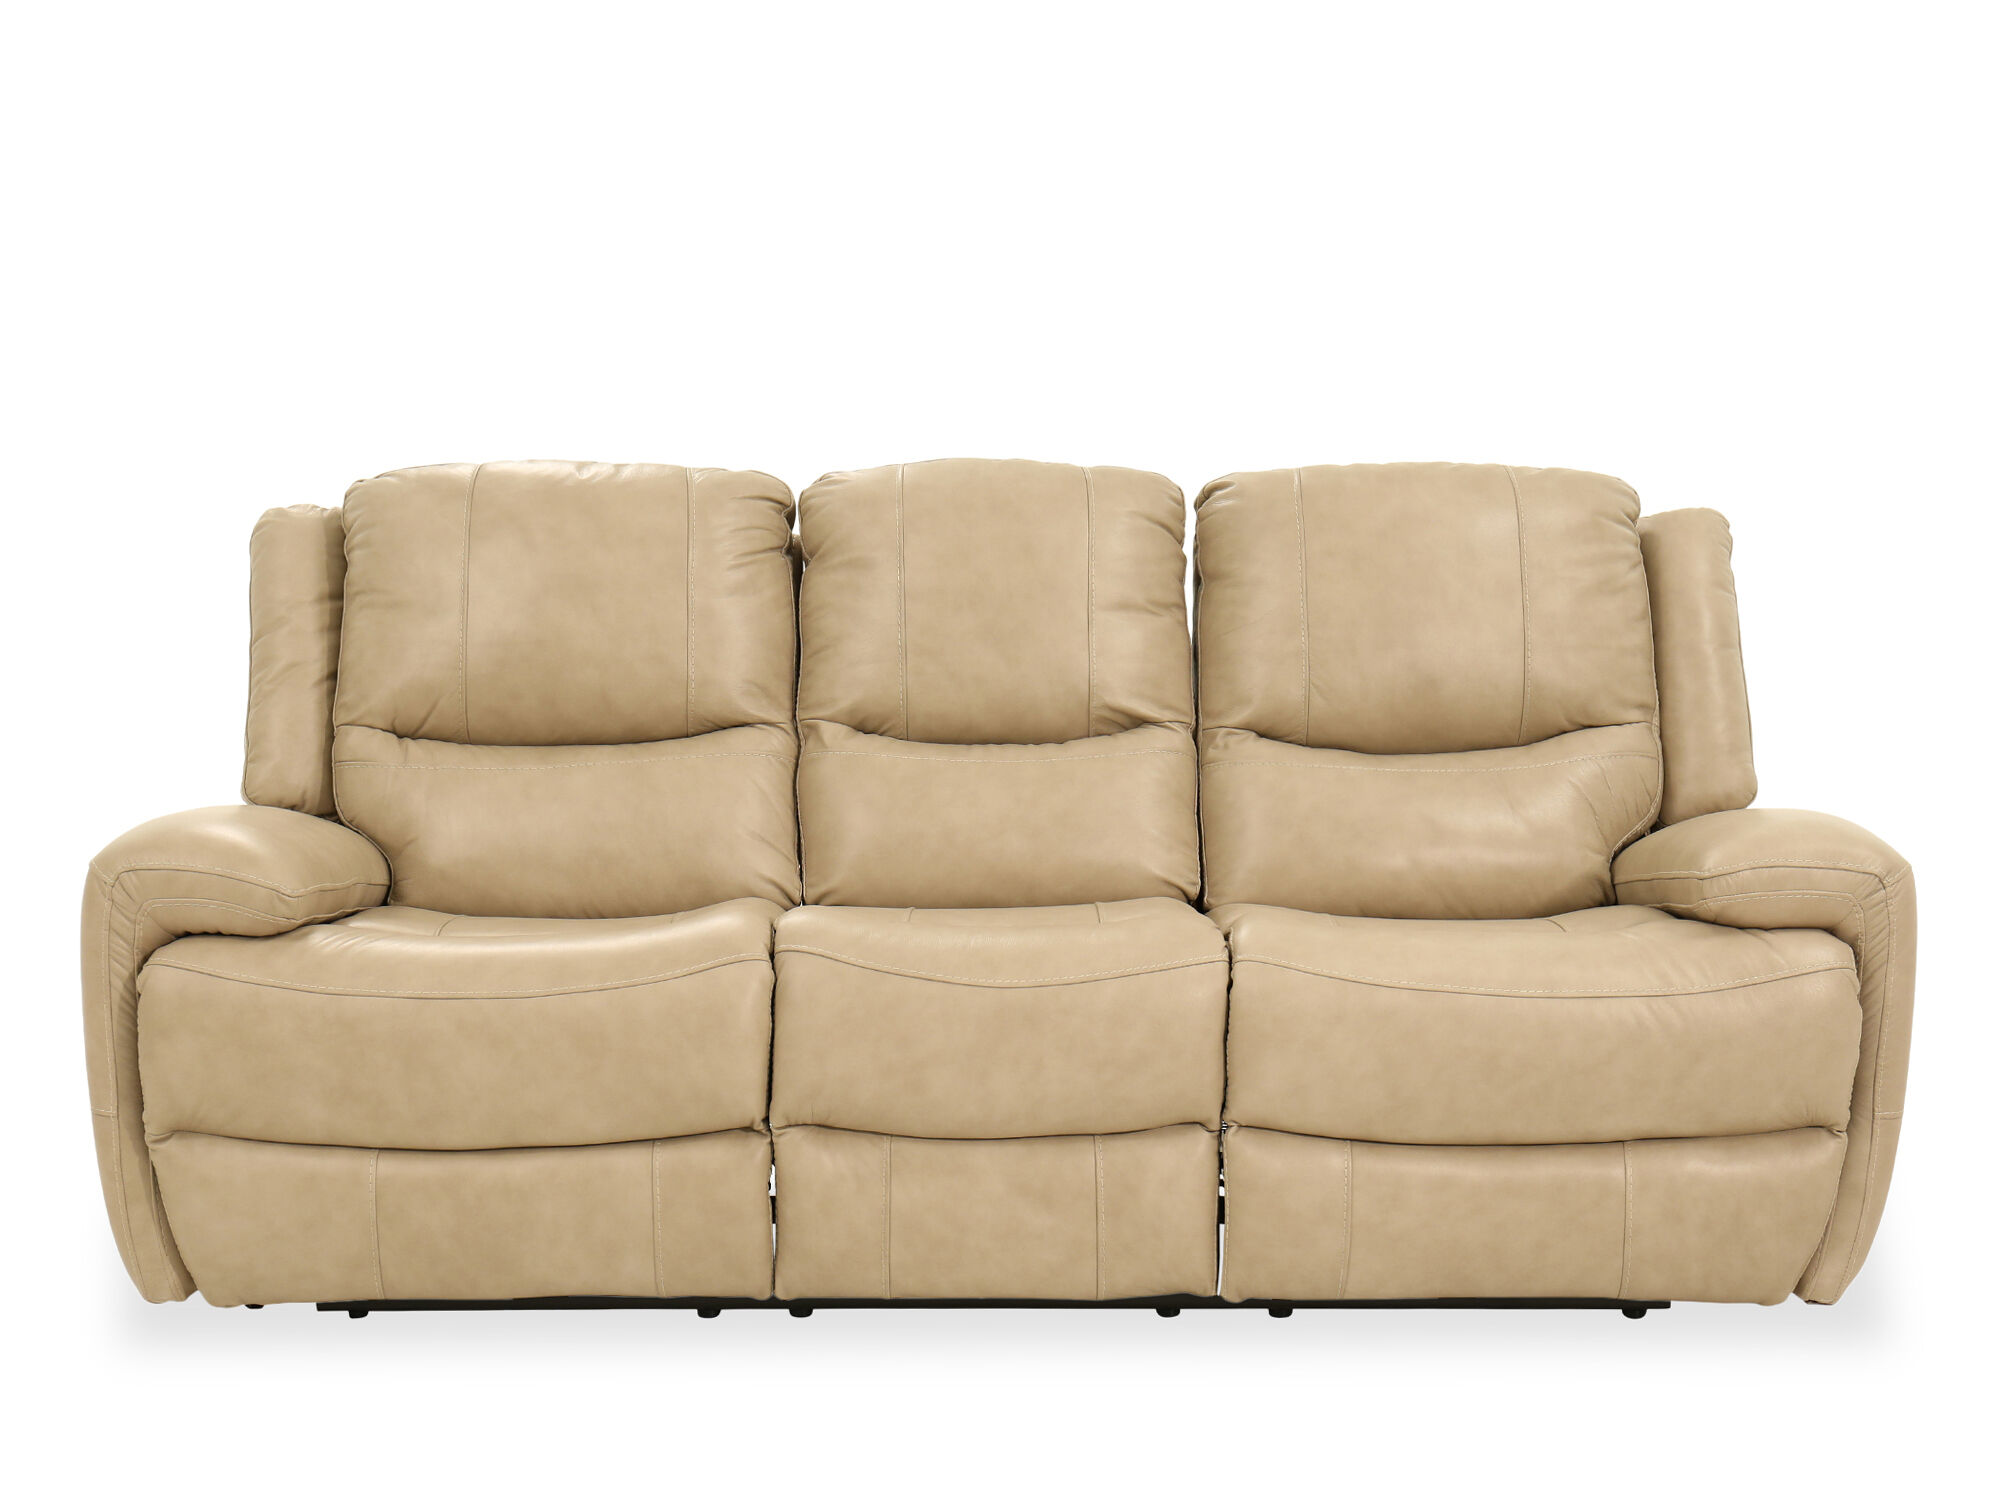 Leather Power Reclining Sofa In Stone, How To Protect Recliner Sofa